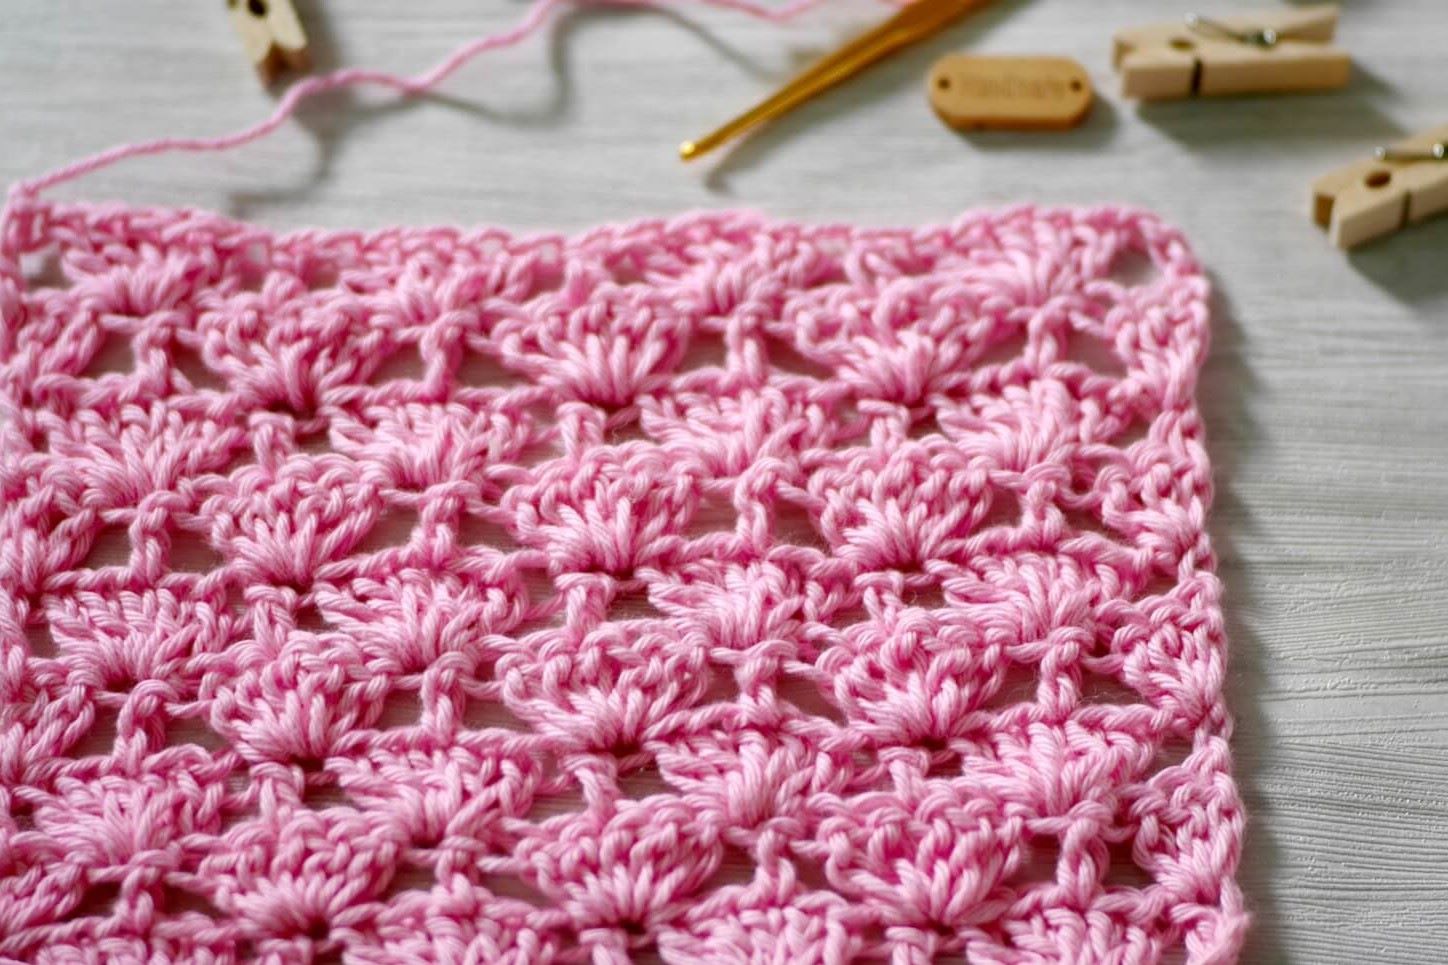 Master The Gorgeous Crochet Shell Stitch Pattern With These Easy Steps!